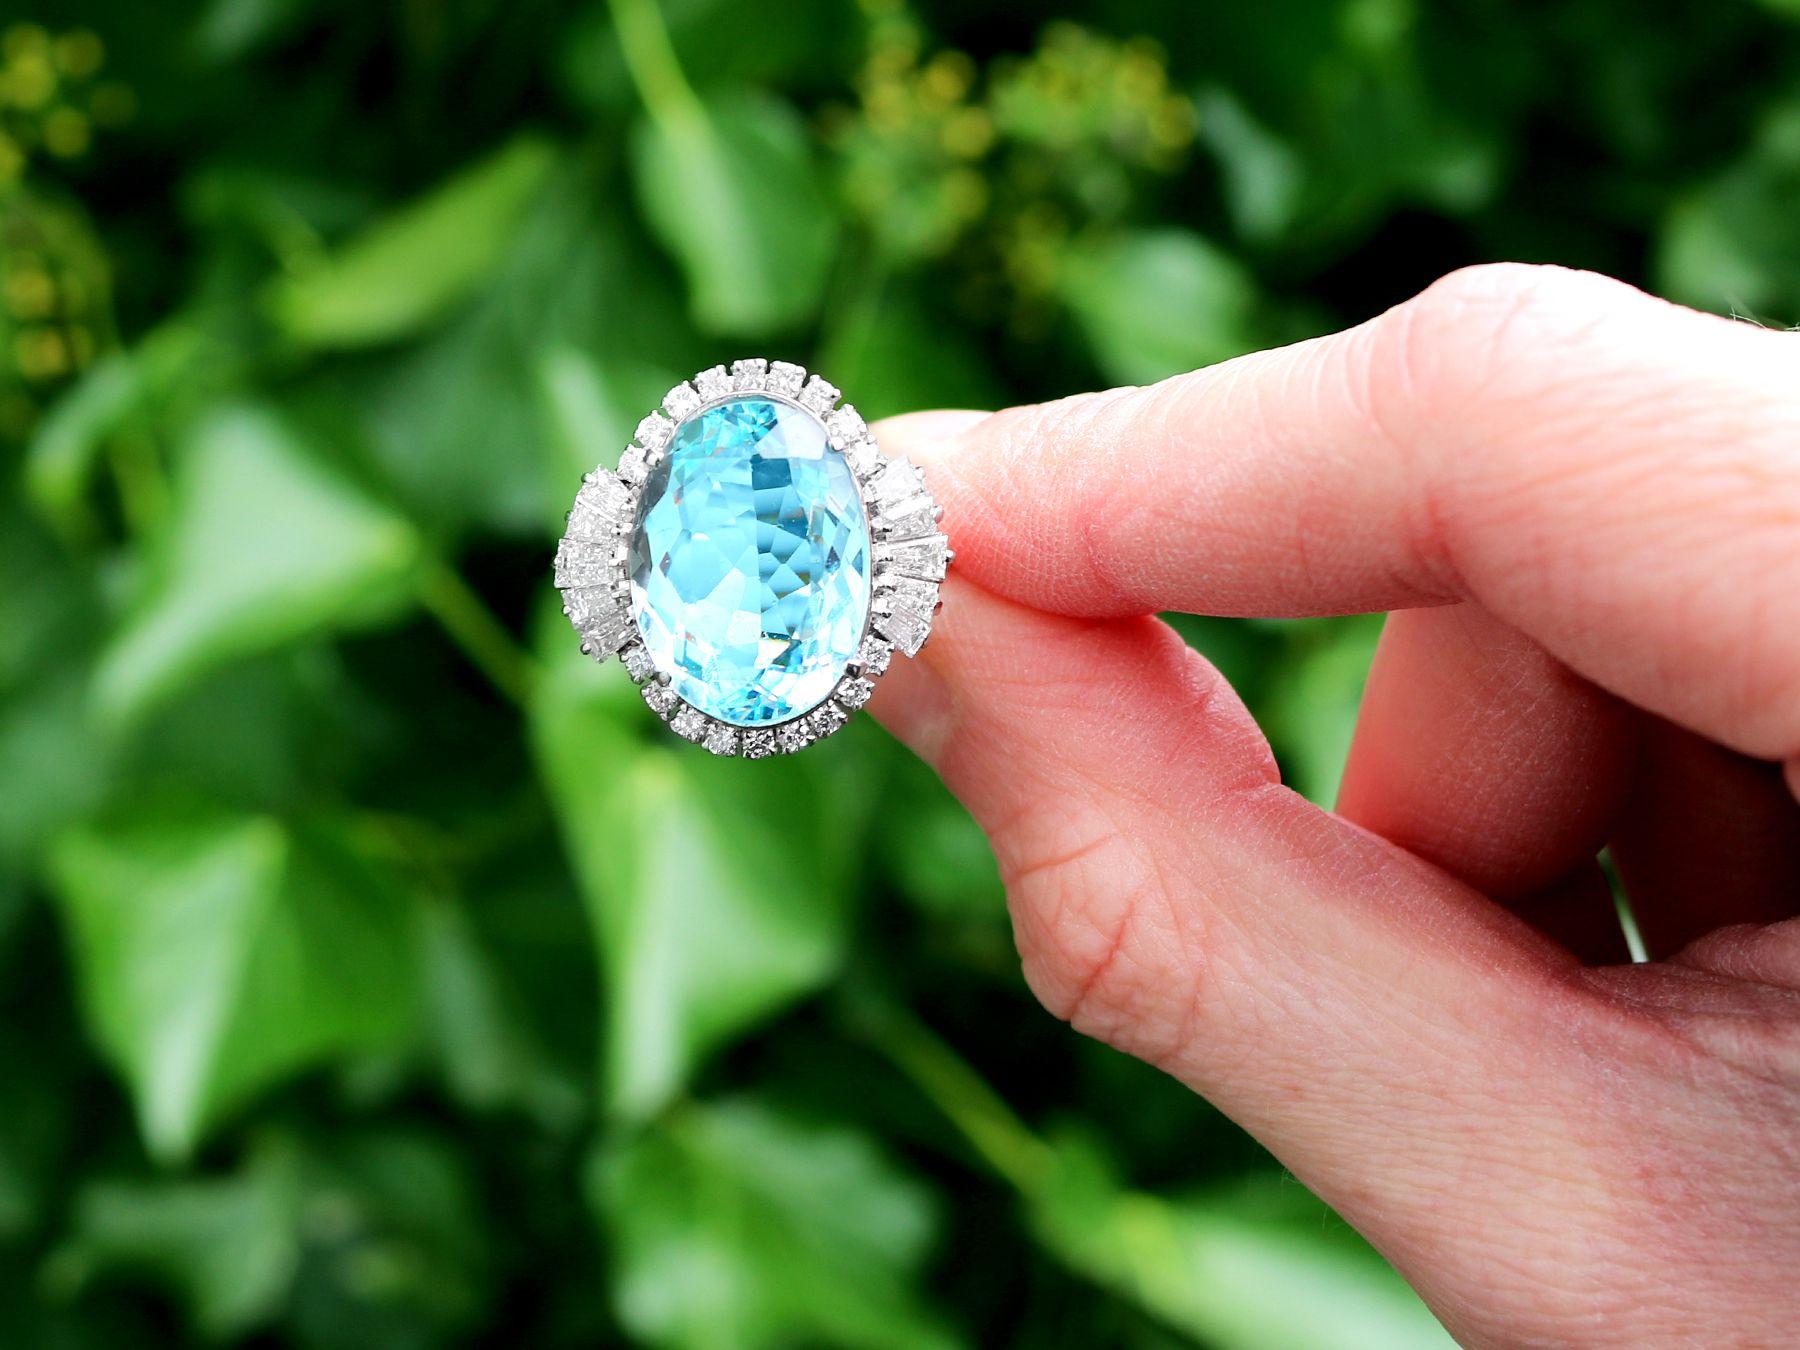 A stunning, fine and impressive 11.76 carat aquamarine and 1.45 carat diamond, platinum cocktail ring; part of our diverse gemstone jewelry and estate jewelry collections.

This stunning, fine and impressive aquamarine ring has been crafted in